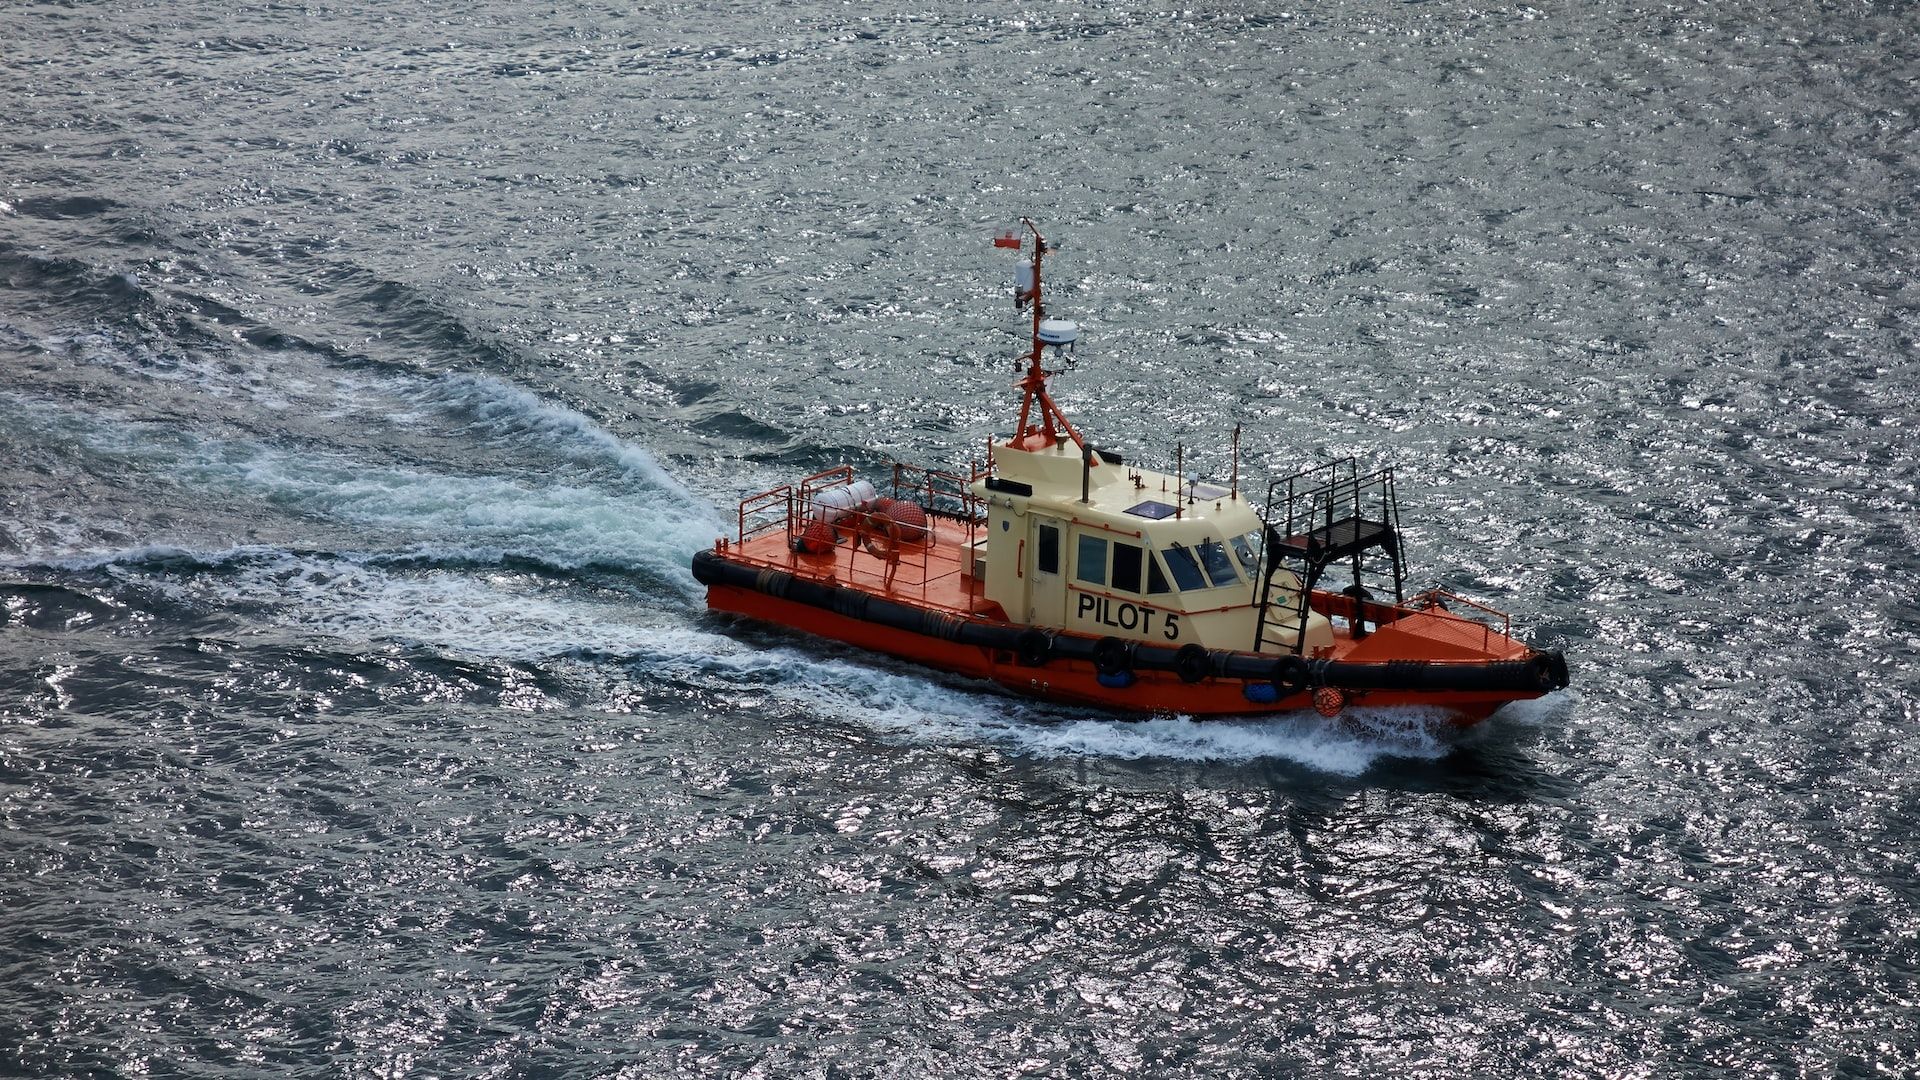 Drone view of a pilot boat